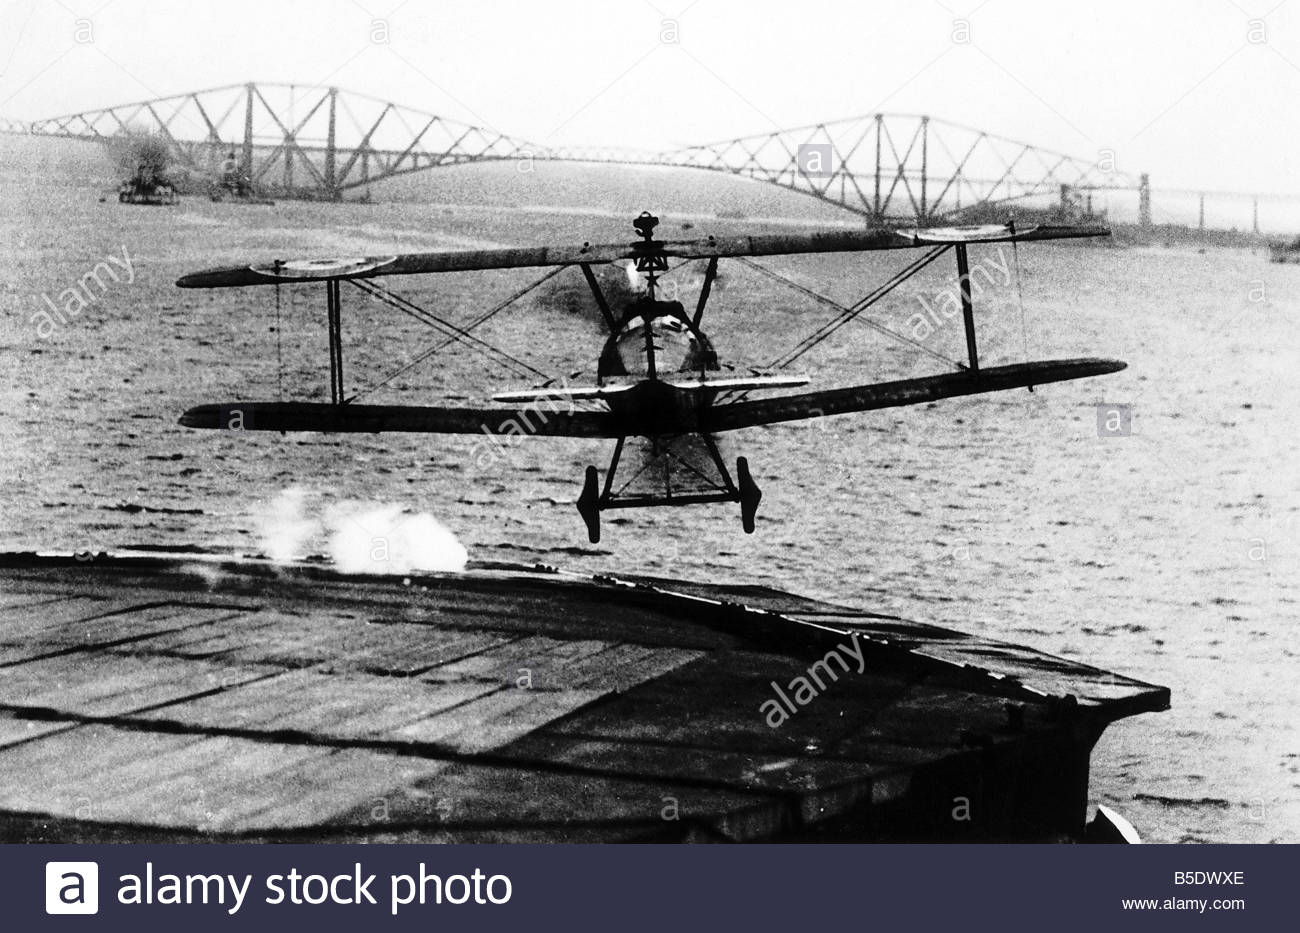 2Fcomp%2FB5DWXE%2Fworld-war-one-a-biplane-takes-off-from-the-deck-of-the-aircraft-carrier-B5DWXE.jpg